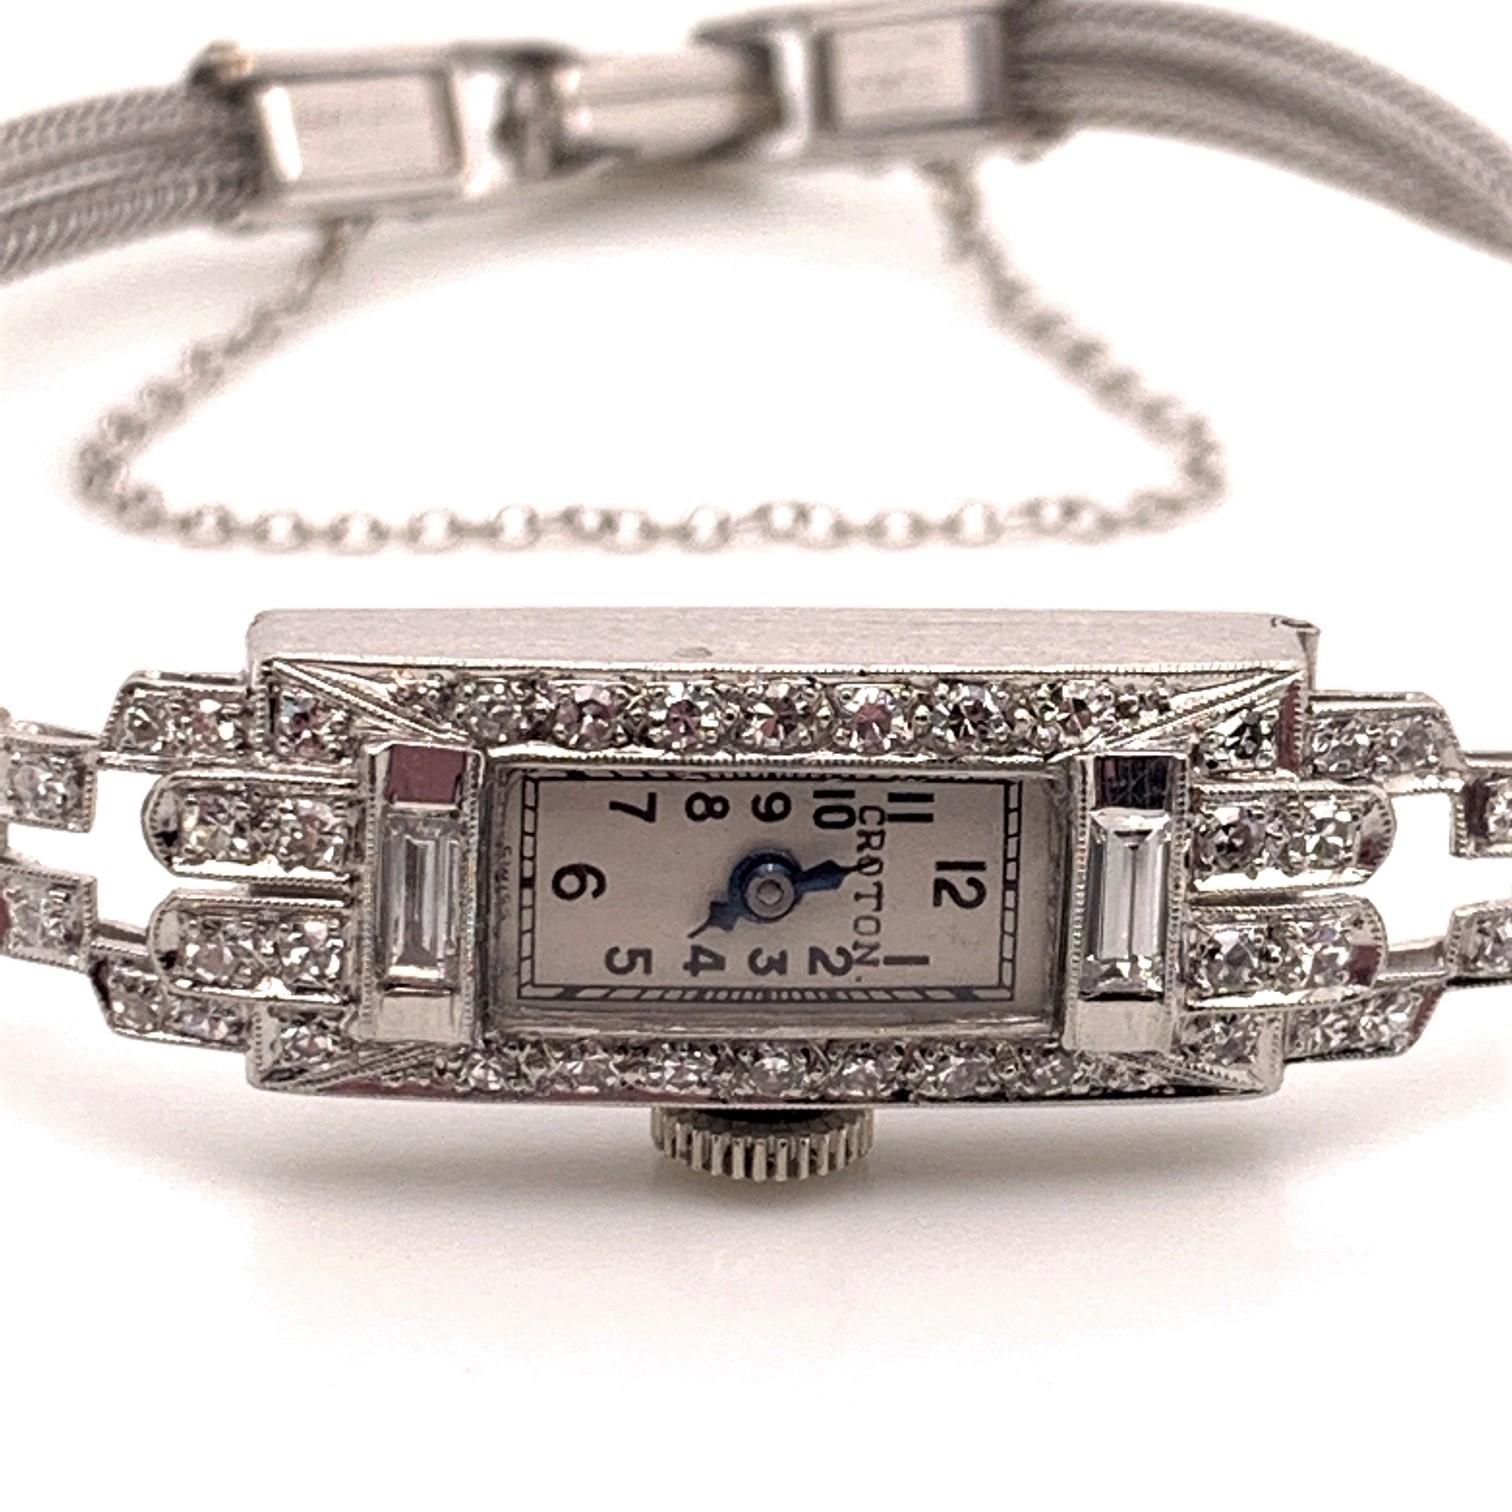 This beautiful vintage timepiece is a showstopper with it's 0.86 carats of diamonds, both baguette and round shaped, set in stunning platinum case with a 14 karat White Gold bracelet and clasp. It is a rare find with its Art Deco step styled design